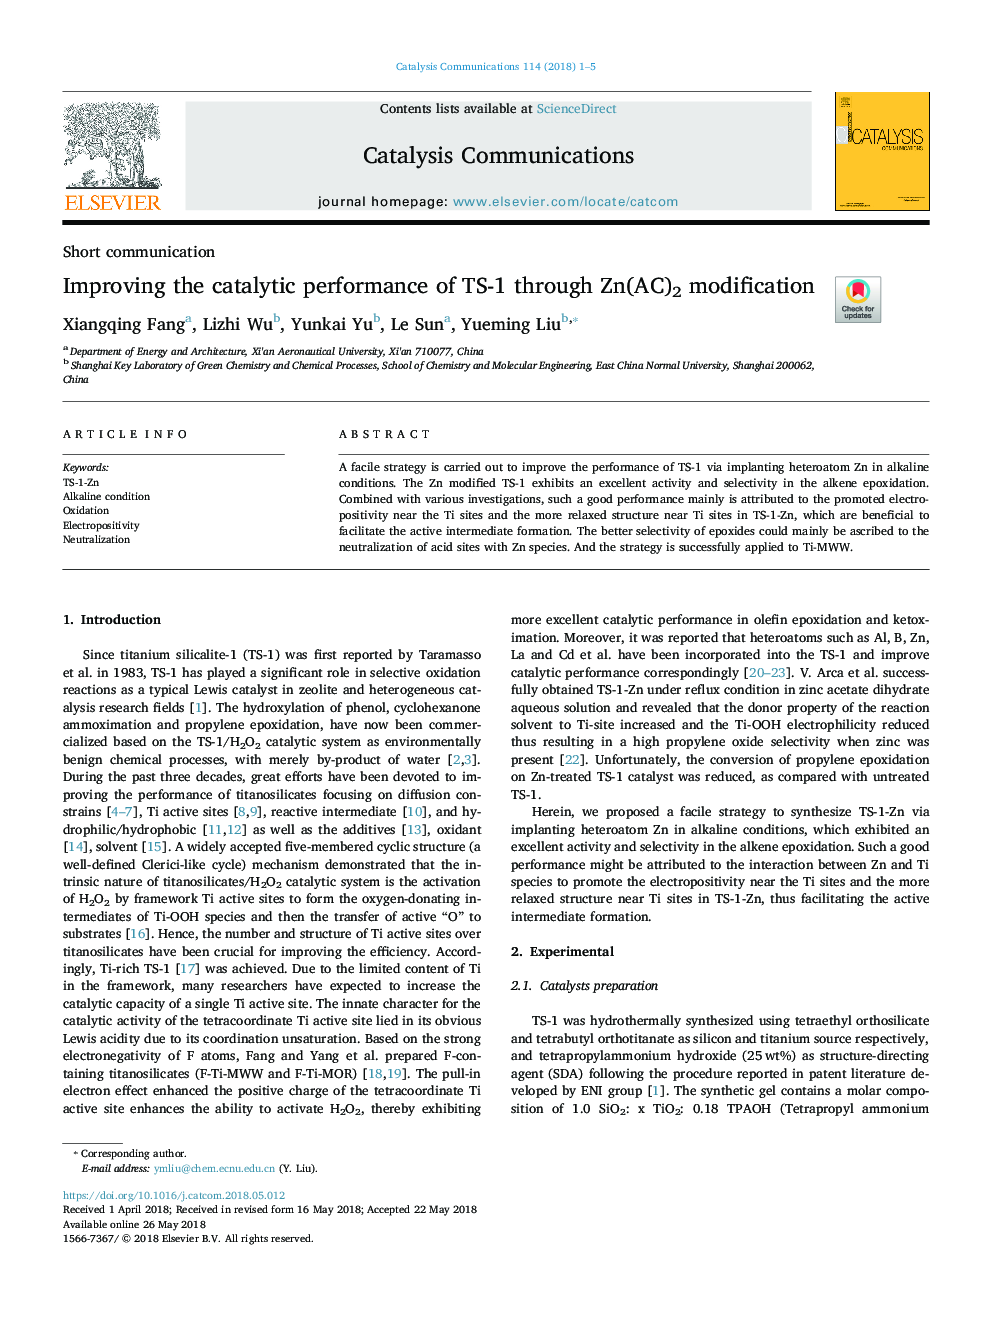 Improving the catalytic performance of TS-1 through Zn(AC)2 modification